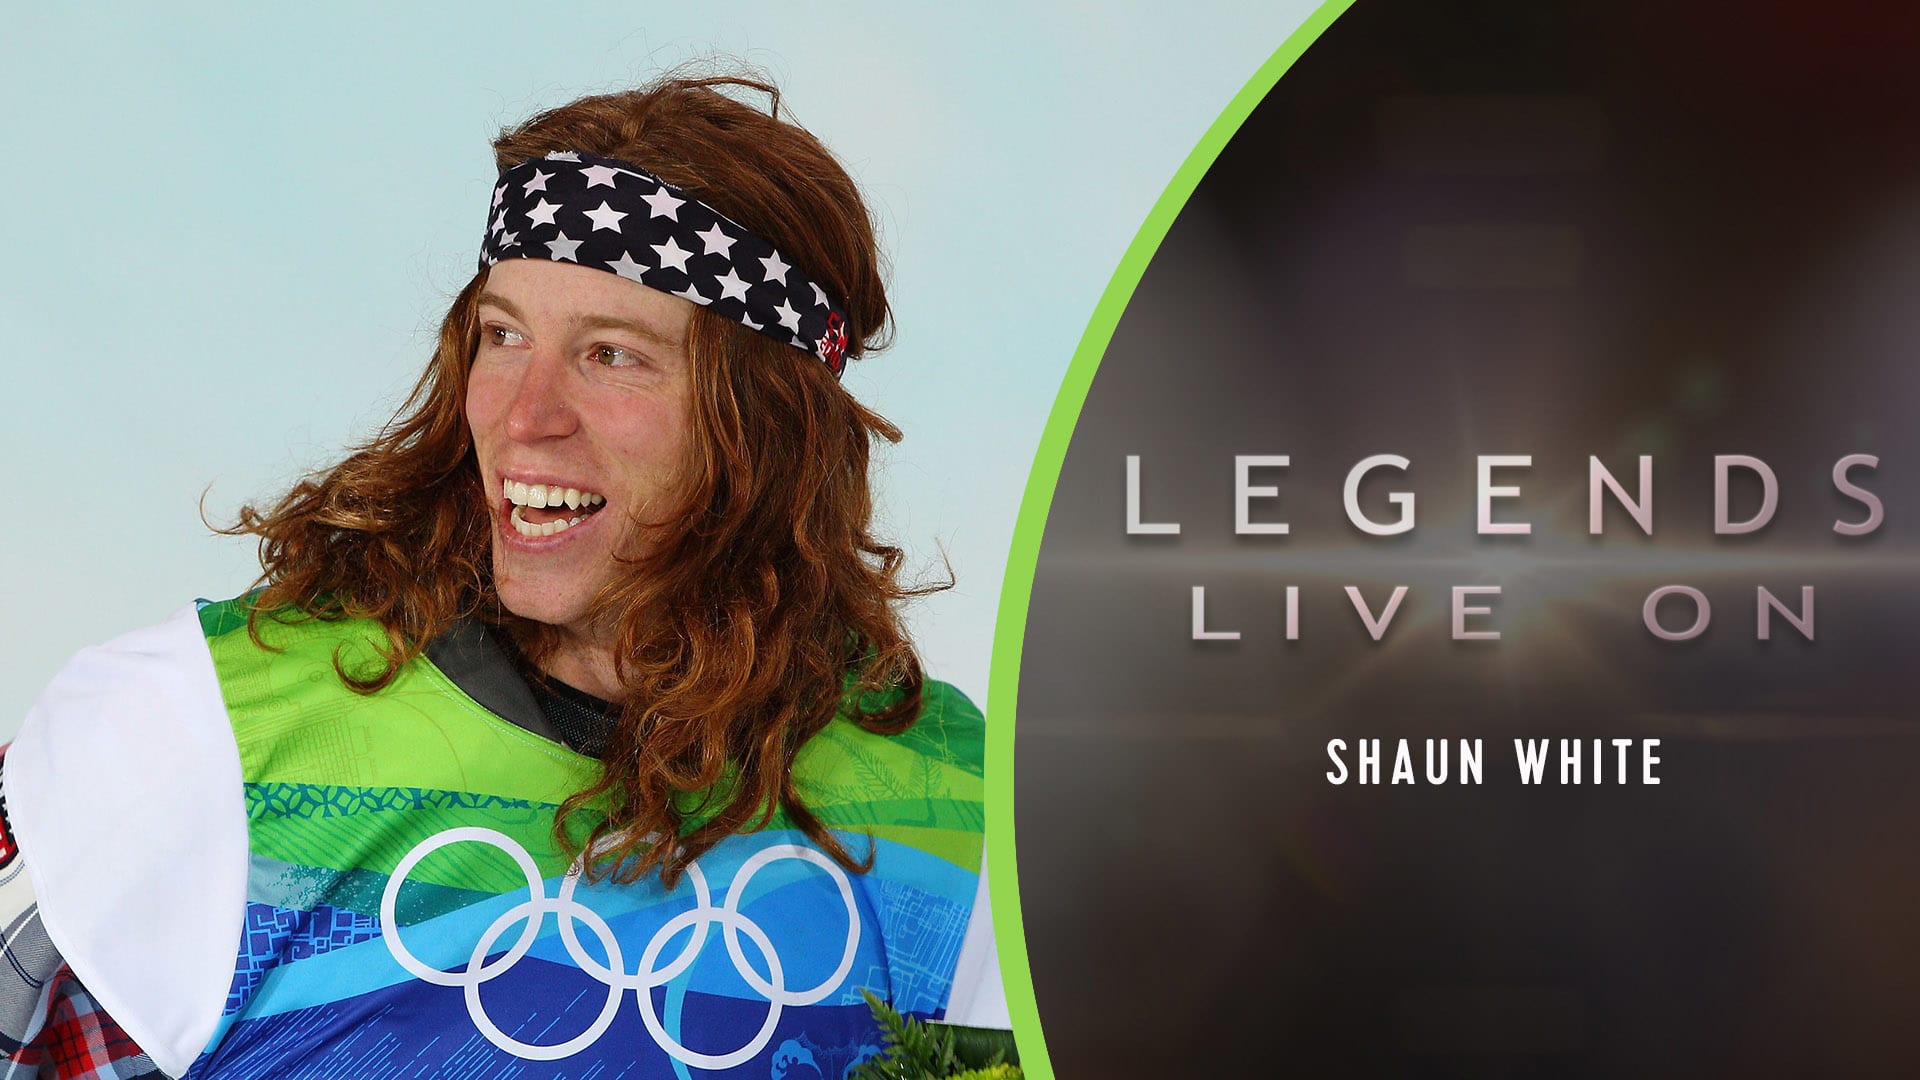 Shaun White most asked questions about the US snowboard legend